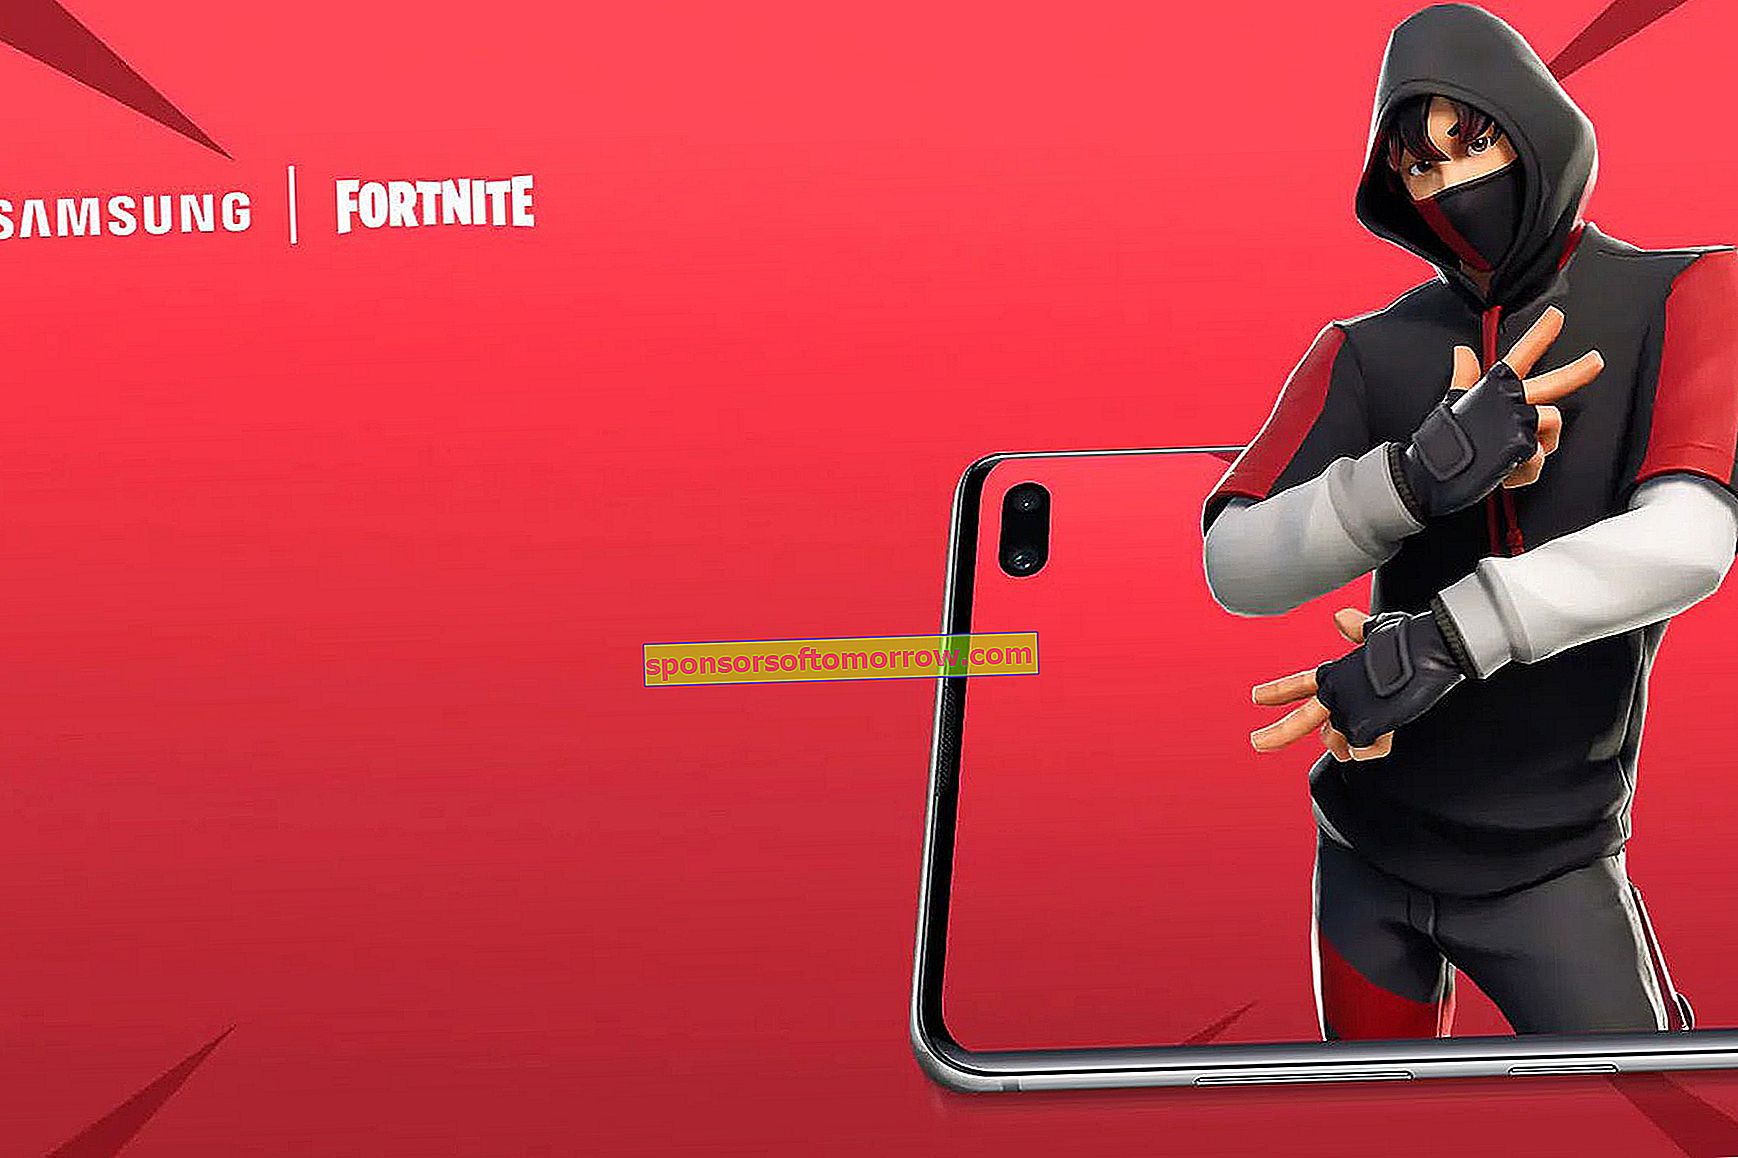 How to get the Fortnite skin of the Samsung Galaxy S10 +